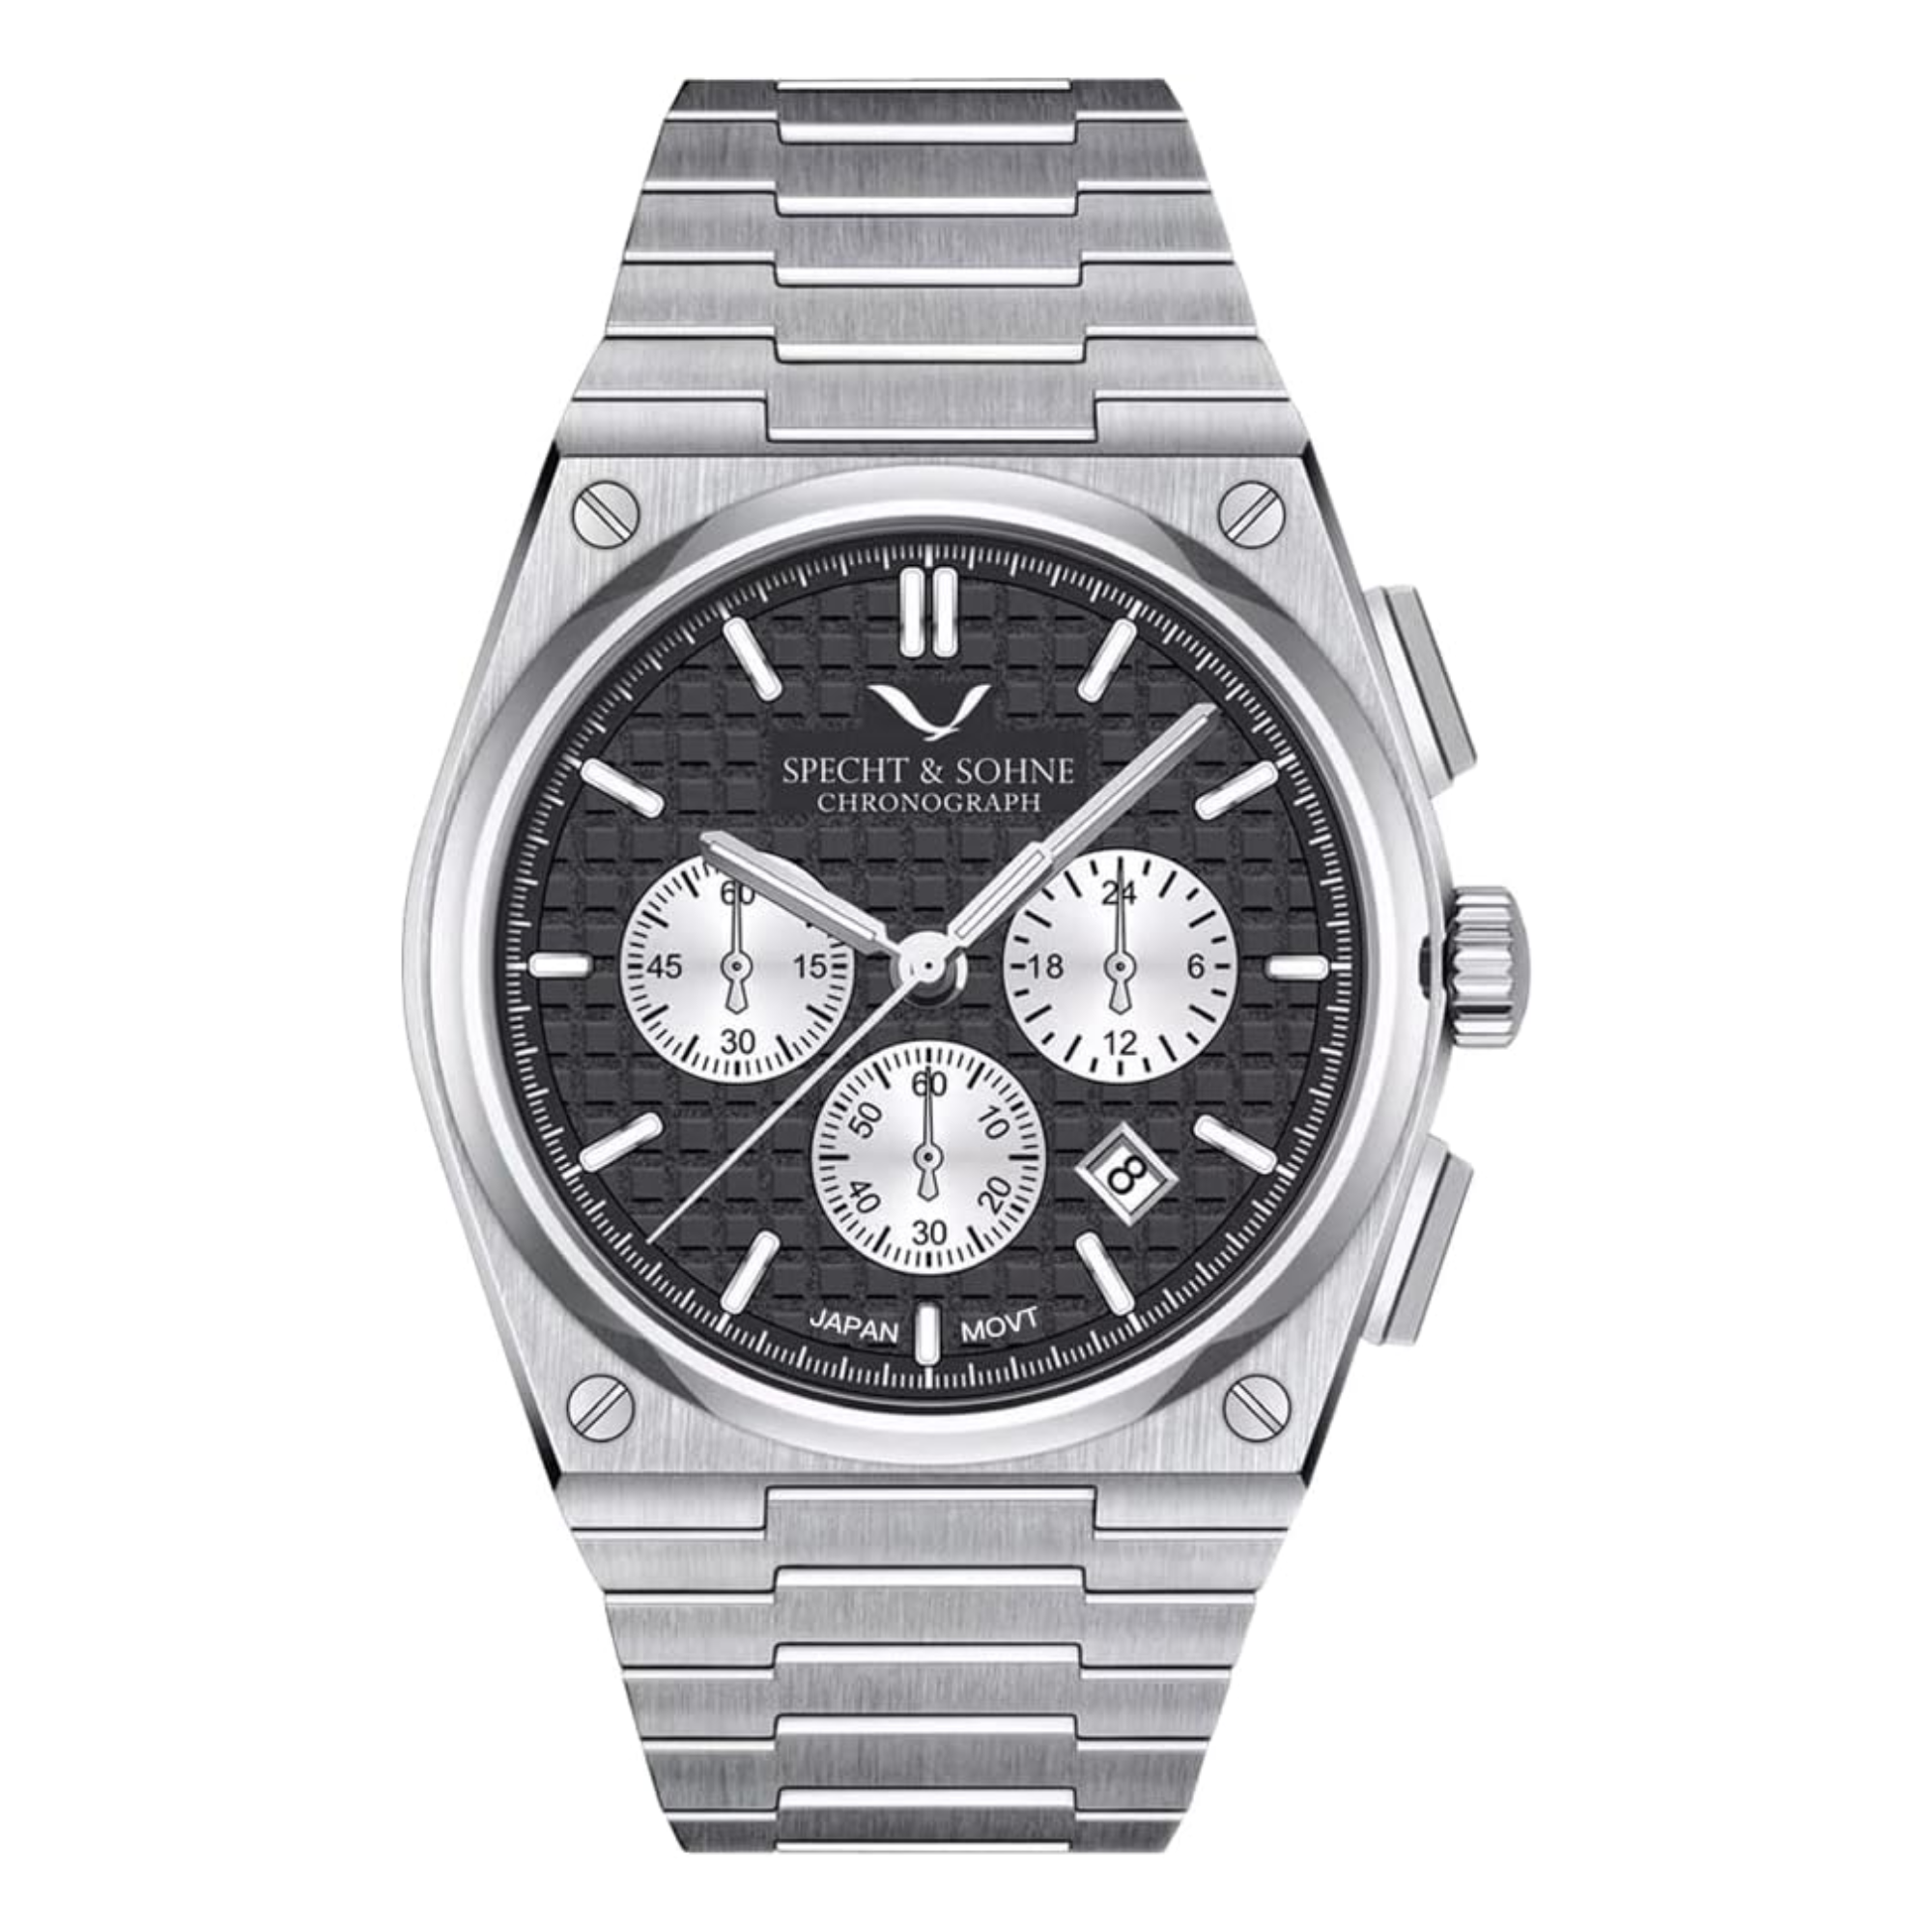 Specht&Sohne Multi-Function Chronograph with Seiko VK63 Watches Stainless Steel Wristwatch